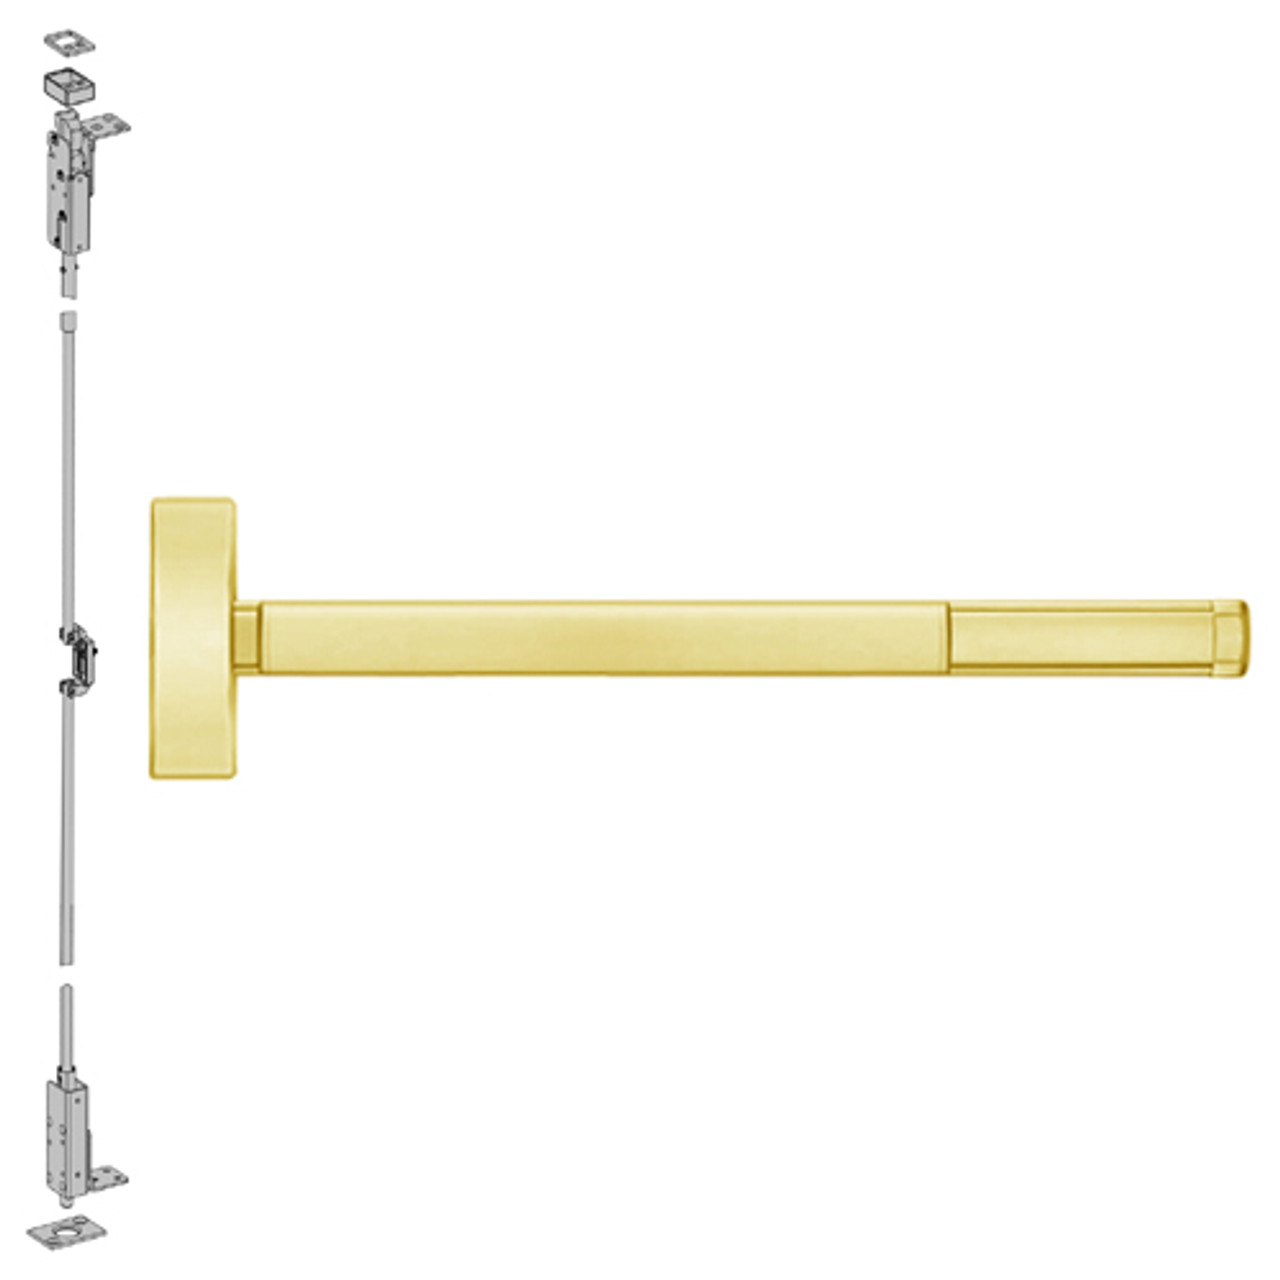 TS2702-605-48 PHI 2700 Series Wood Door Concealed Vertical Exit Device with Touchbar Monitoring Switch Prepped for Dummy Trim in Bright Brass Finish